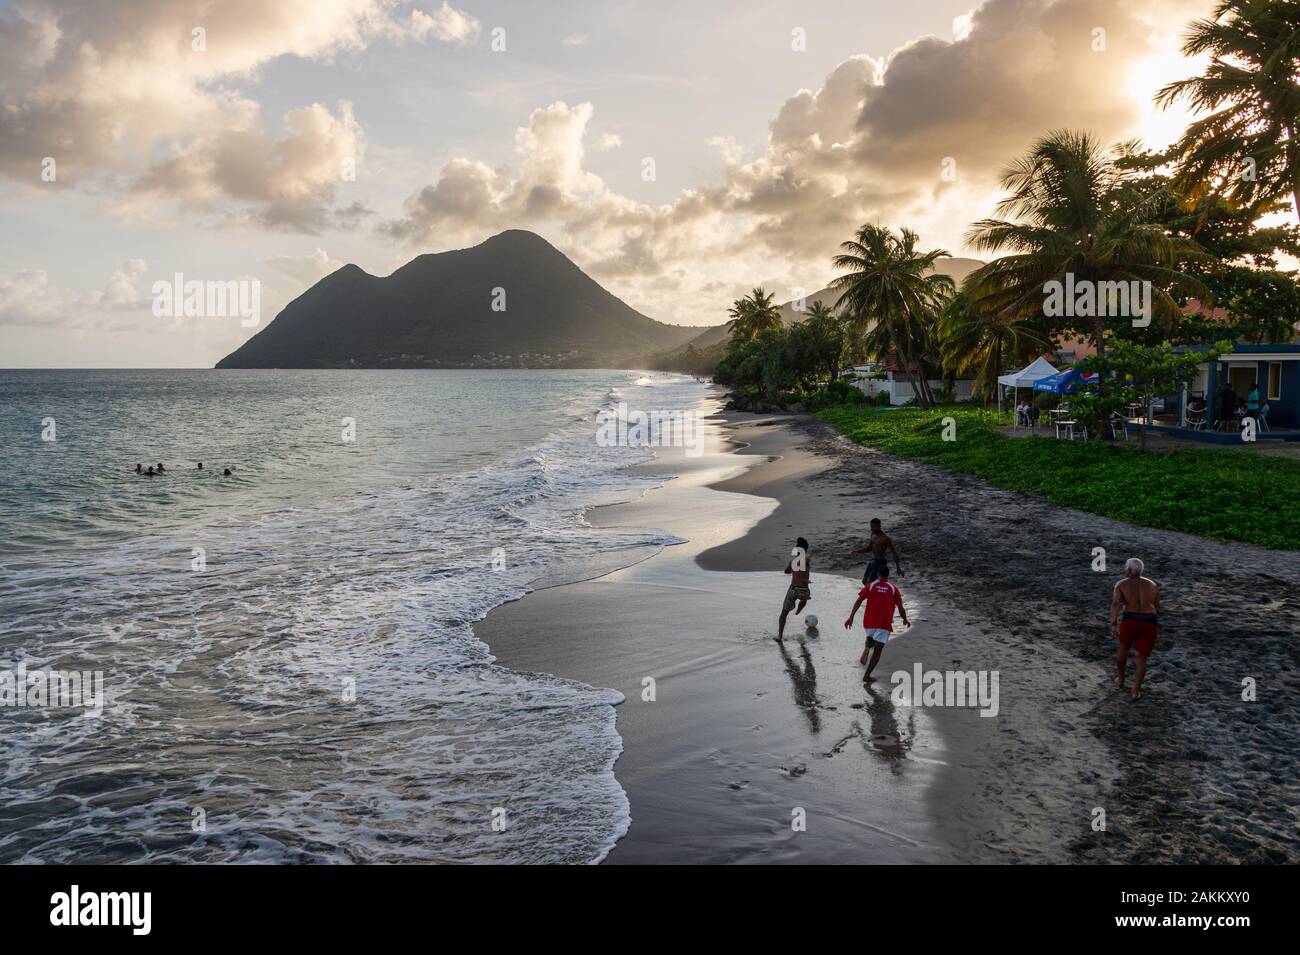 Le Diamant, Martinique, France - 16 August 2019: Le Diamant Beach in Martinique, with men playing with a ball and Sleeping Woman mountain in backgroun Stock Photo